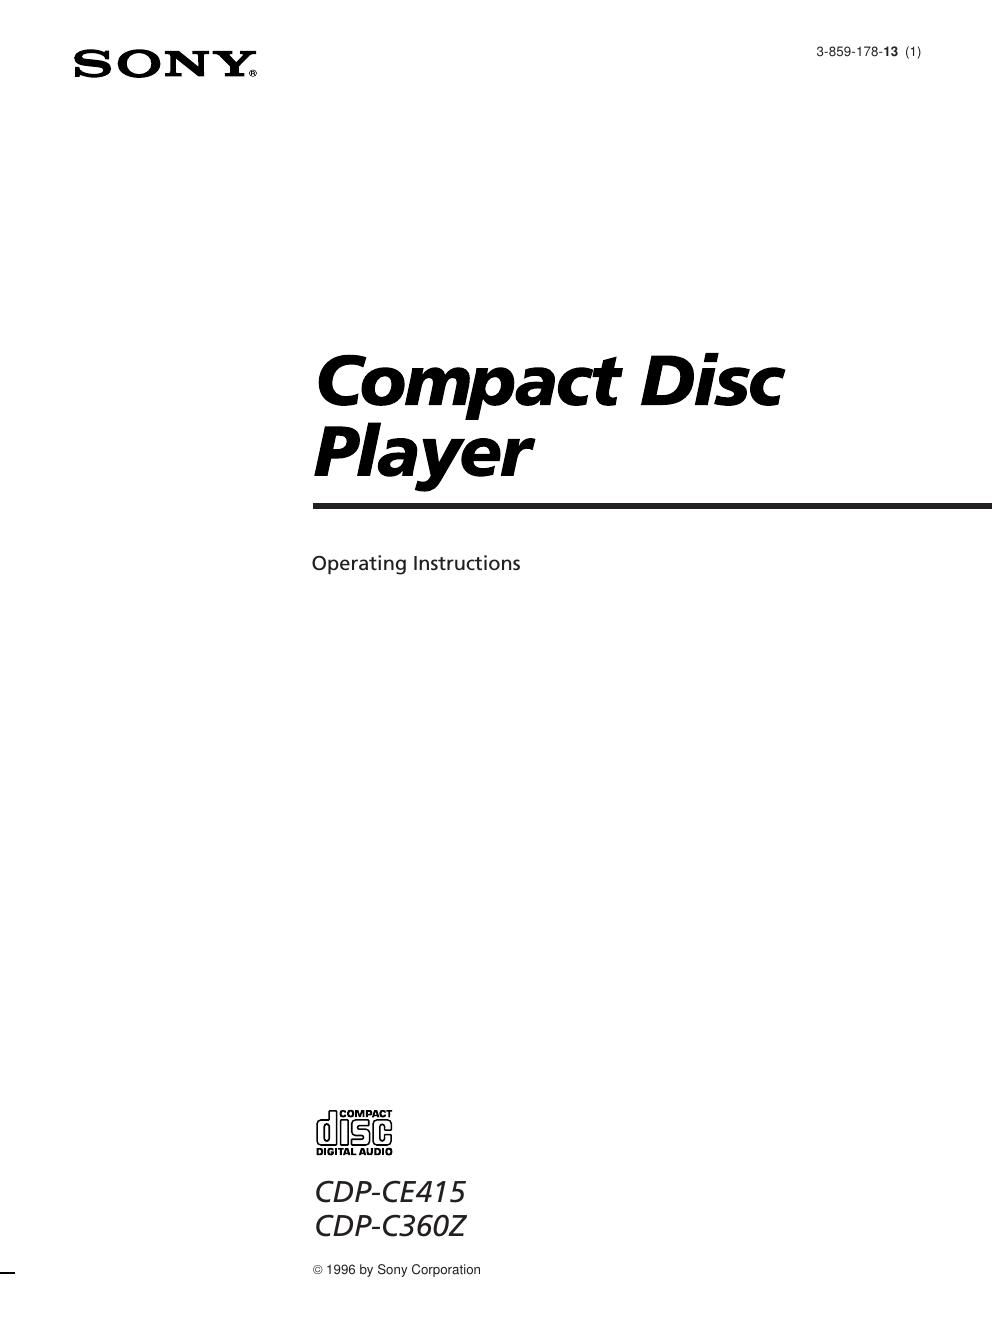 sony cdp c 360 z owners manual